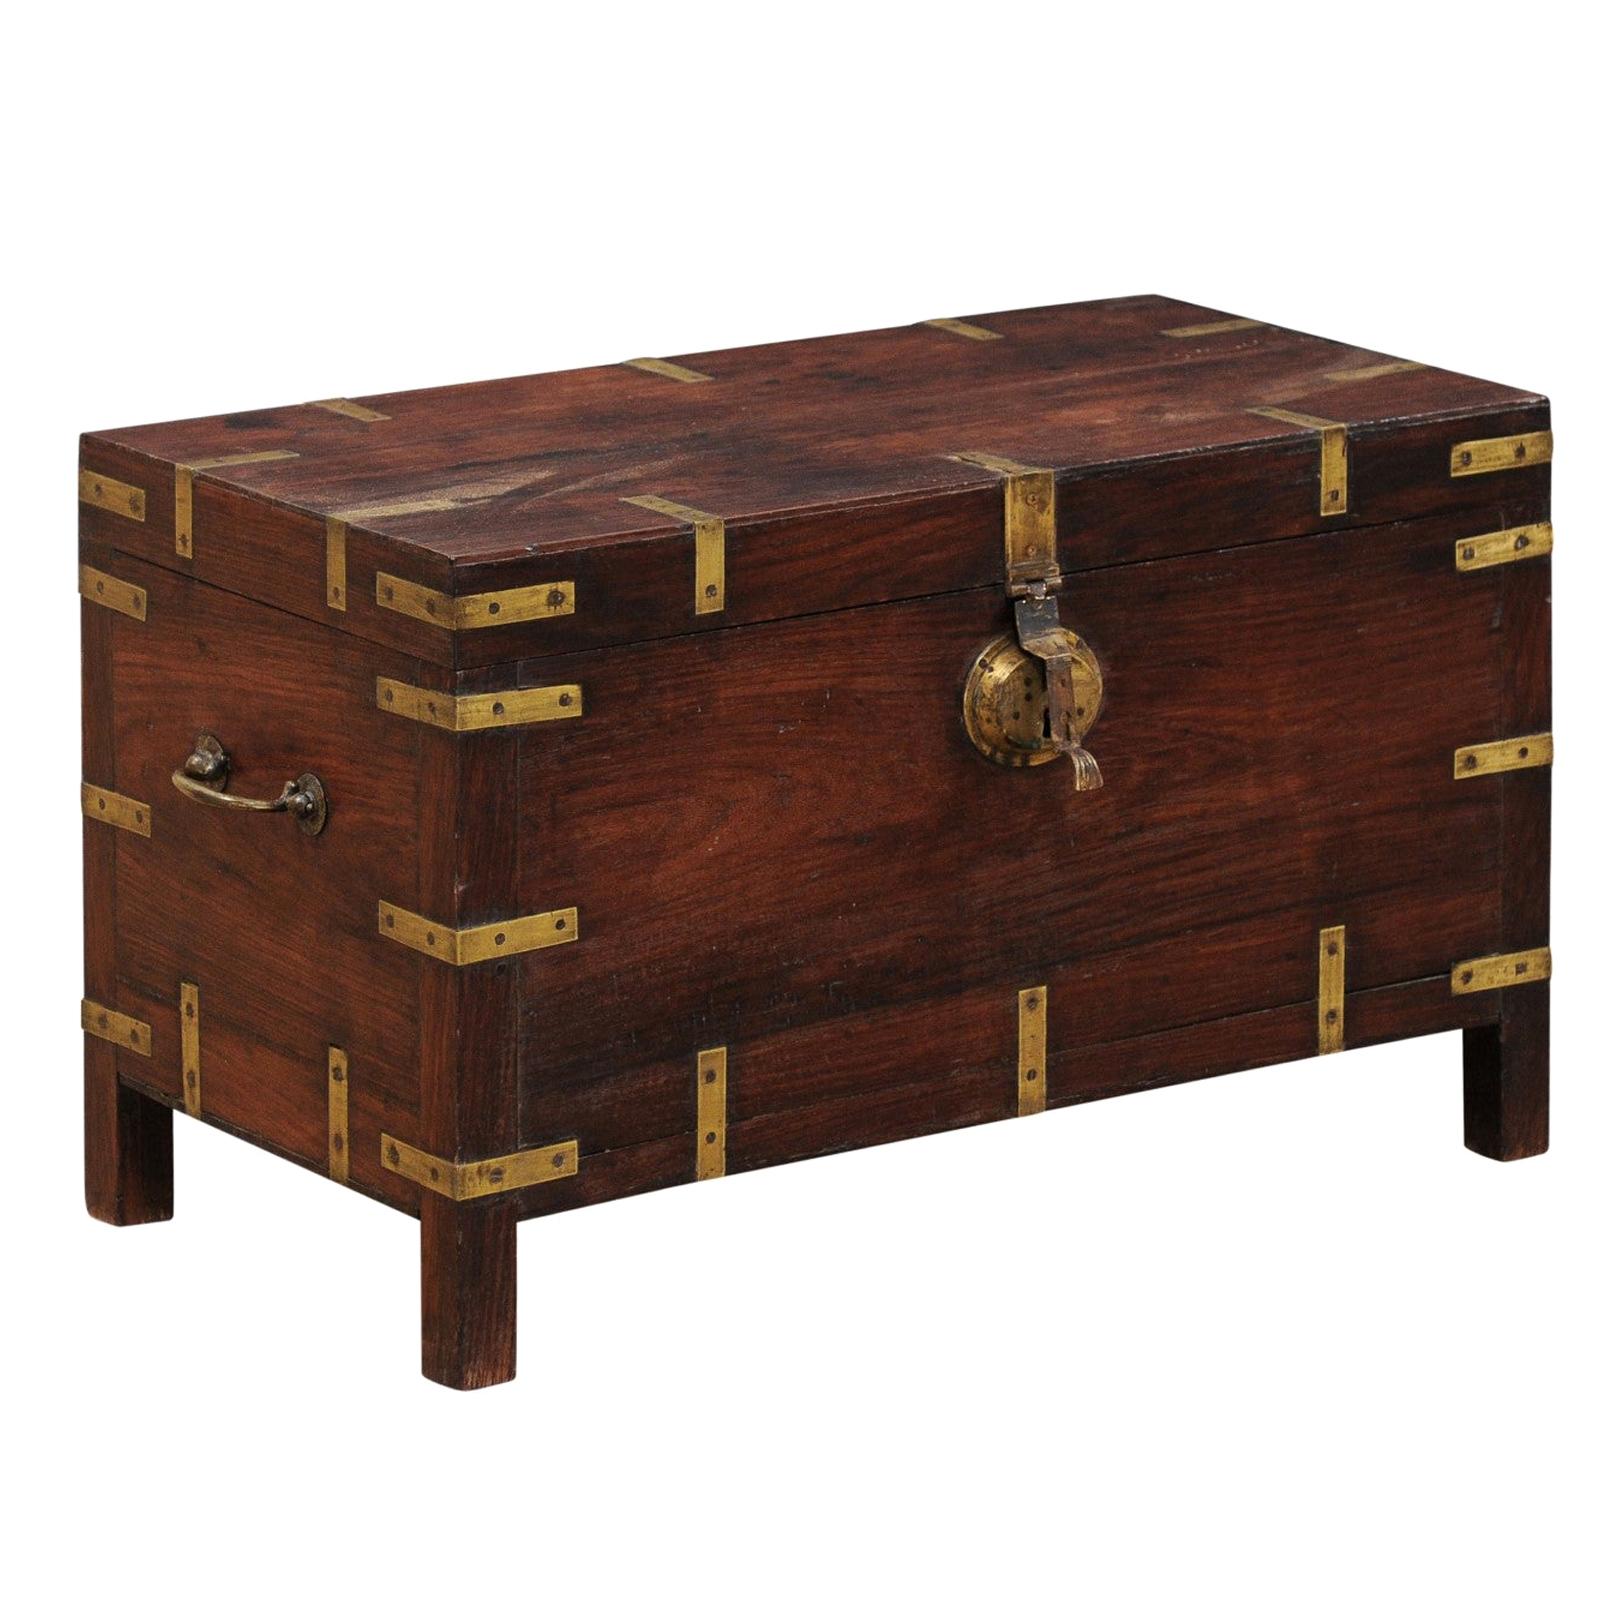 1920s British Colonial Trunk of Rosewood and Brass-Great Little Coffee Table